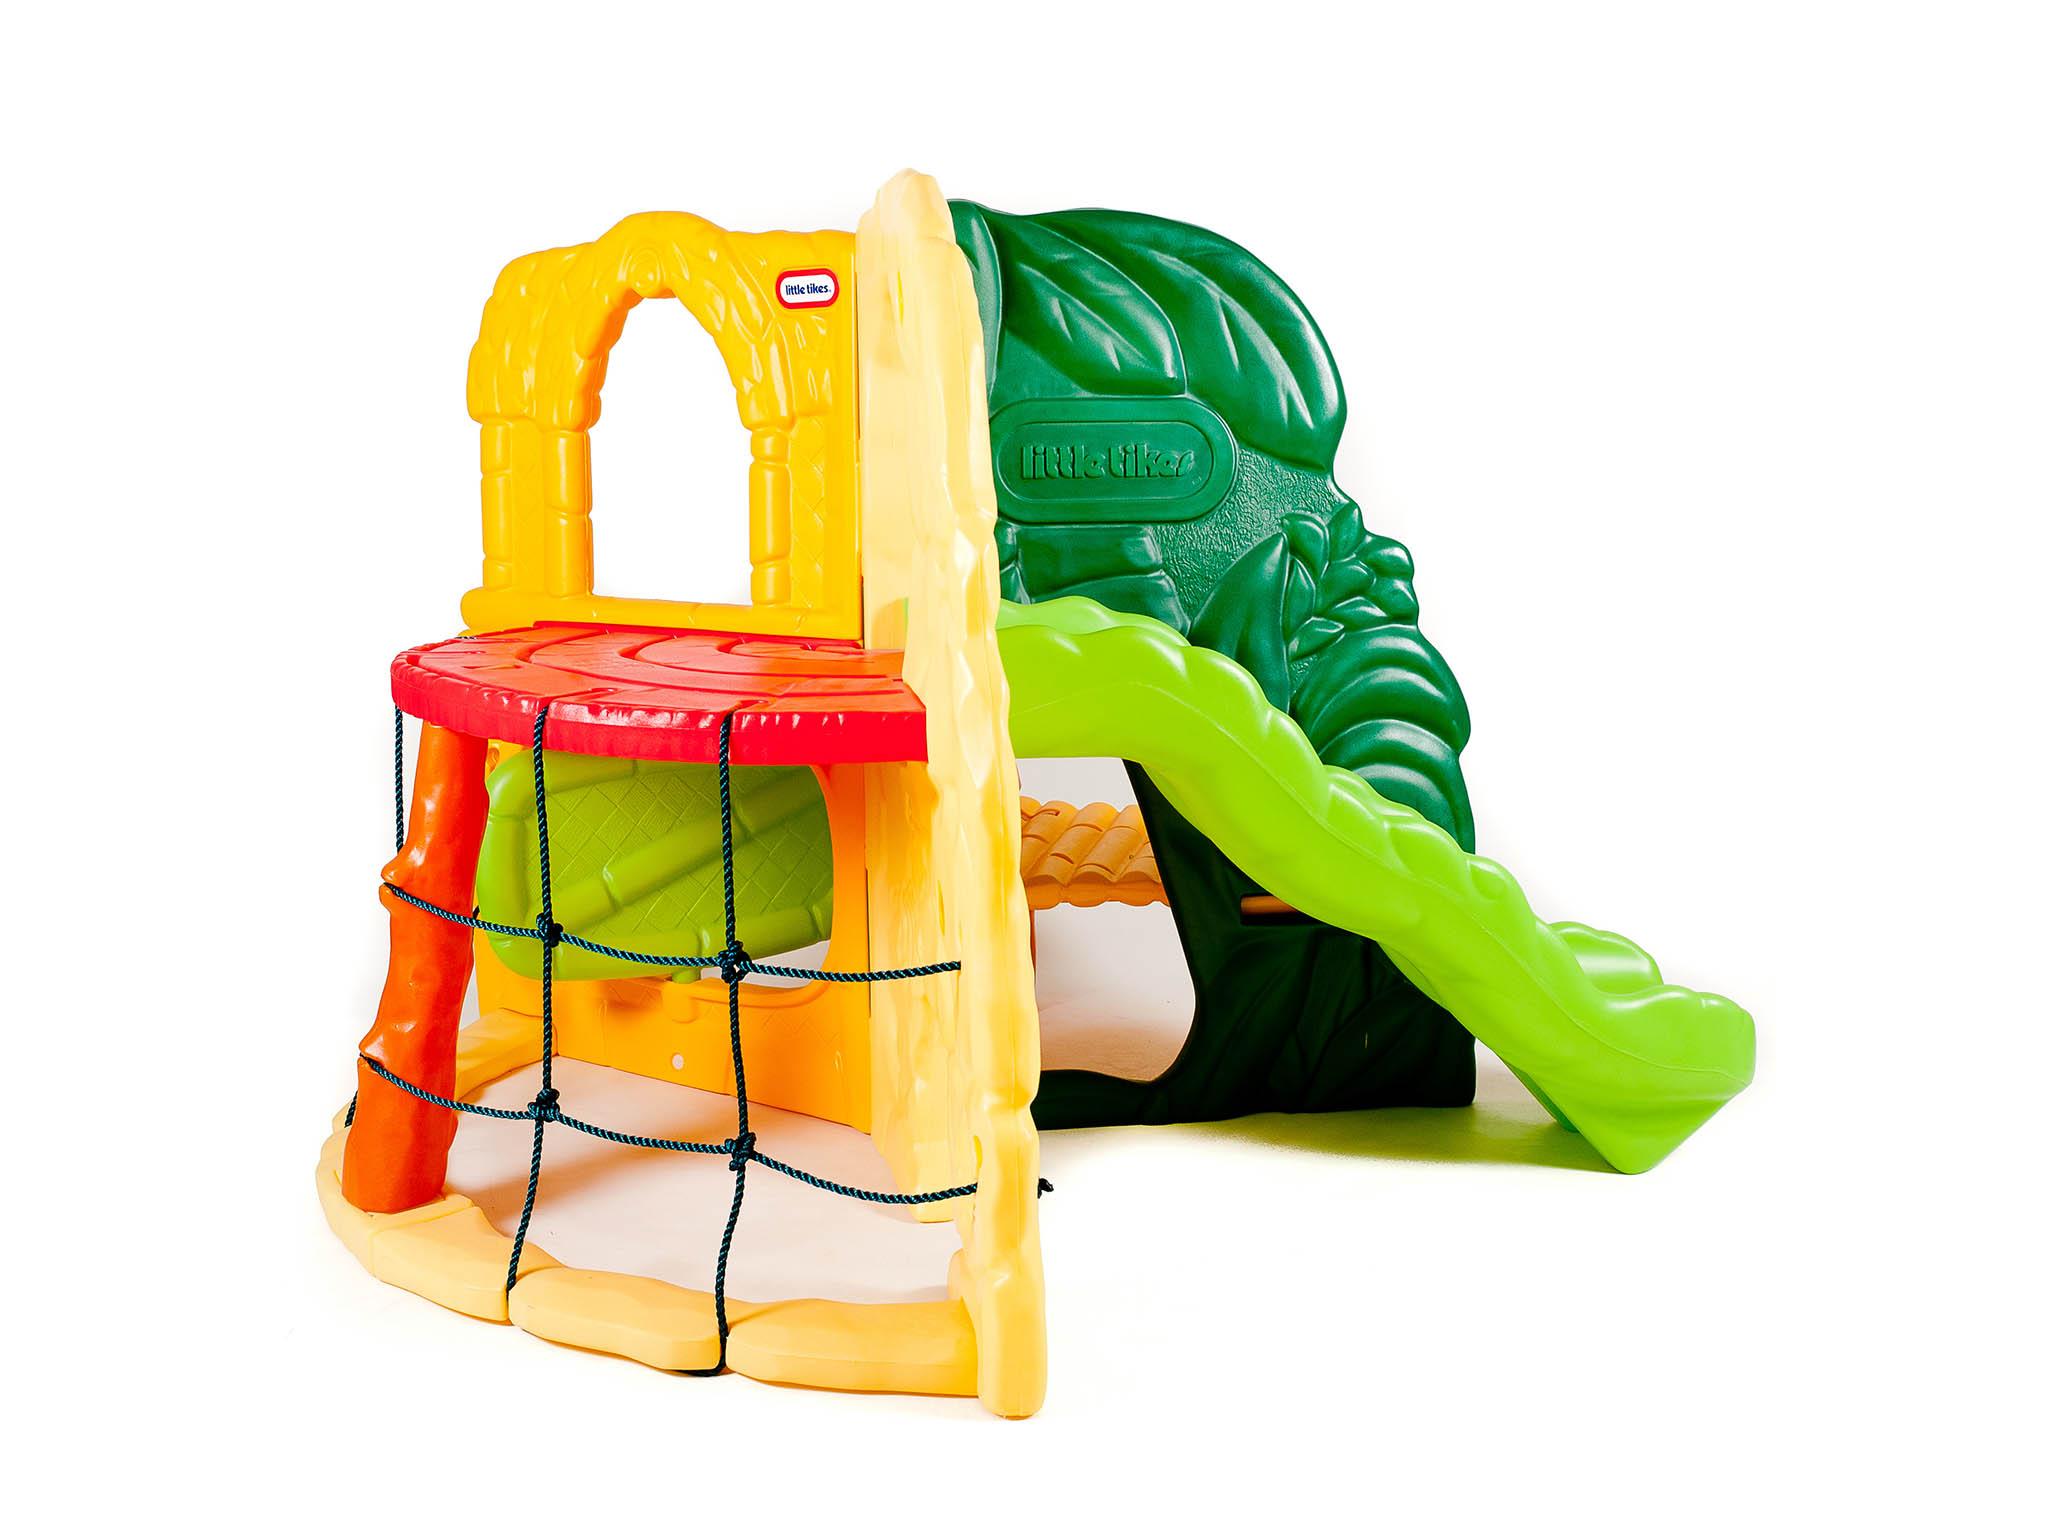 climbing frame and slide for toddlers